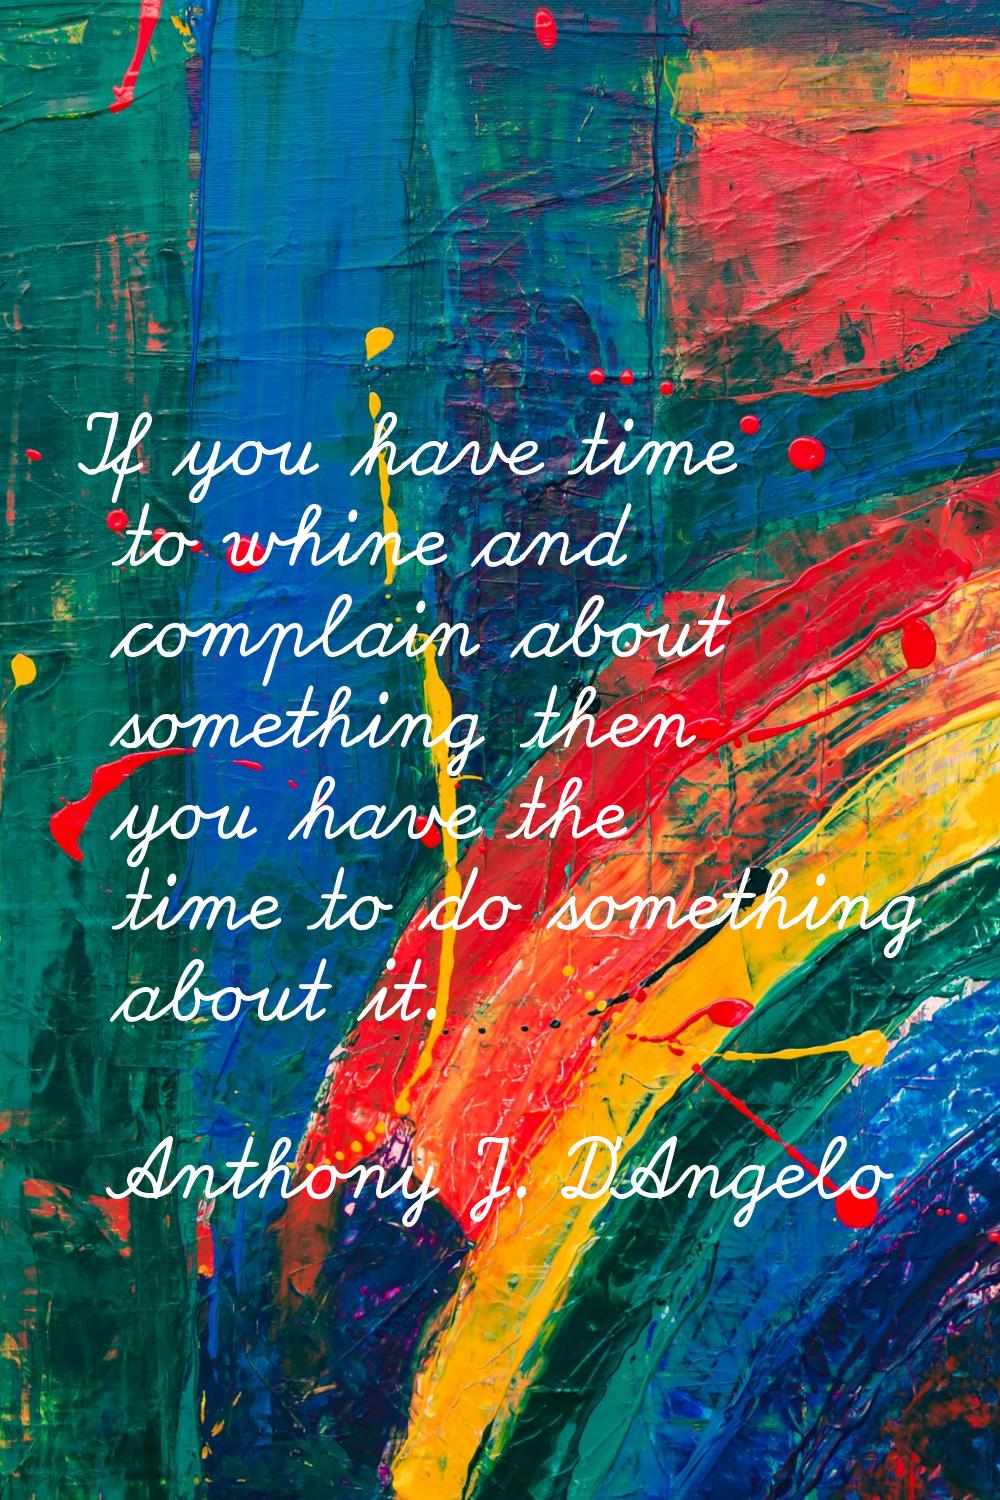 If you have time to whine and complain about something then you have the time to do something about